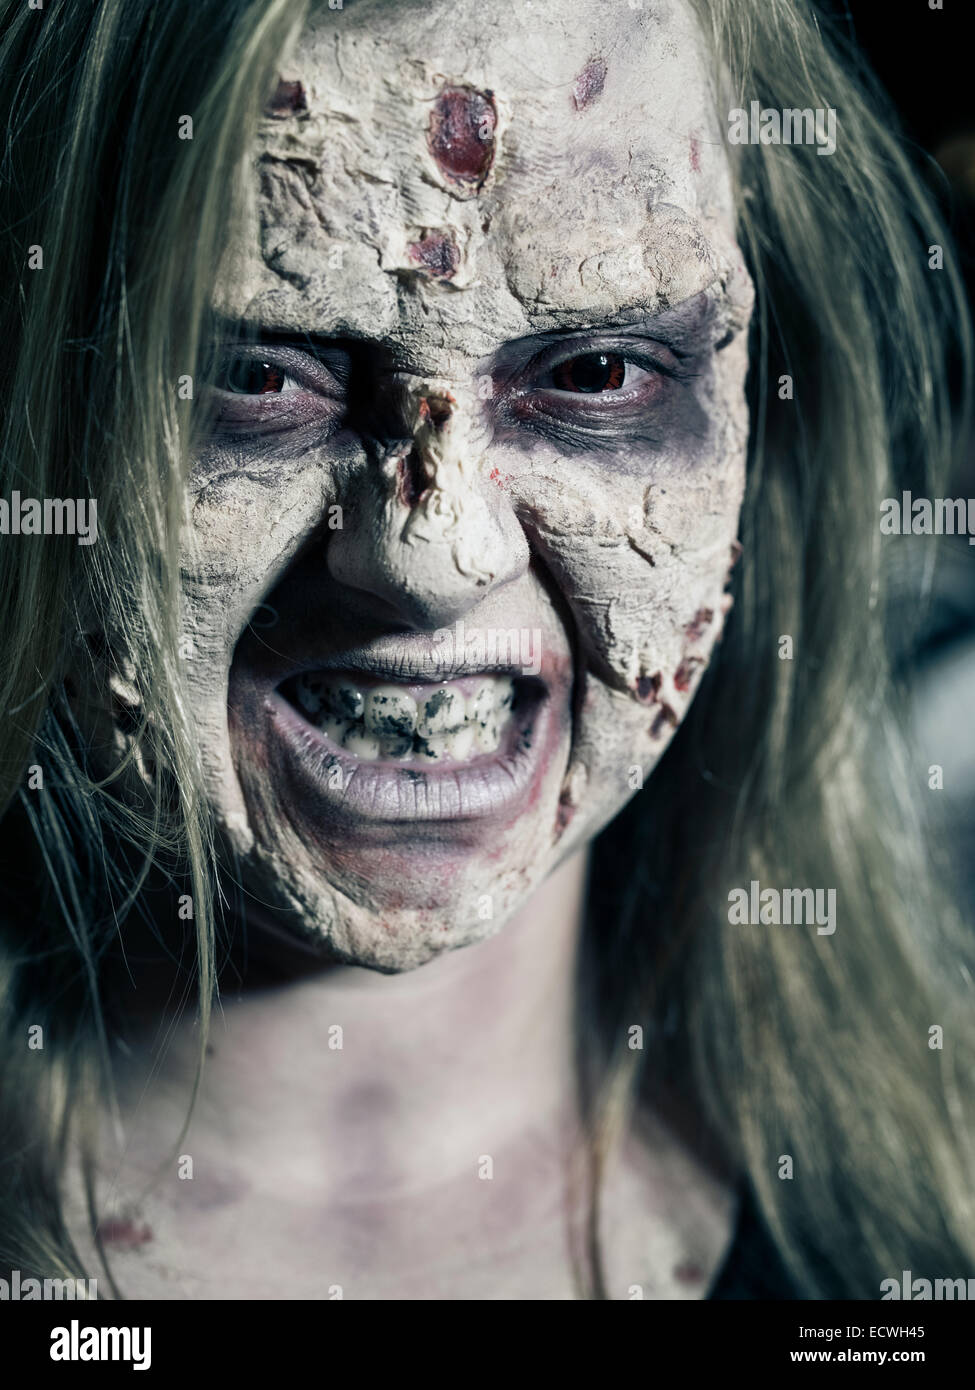 Zombie - Halloween costume with impressive special effects  makeup. Stock Photo